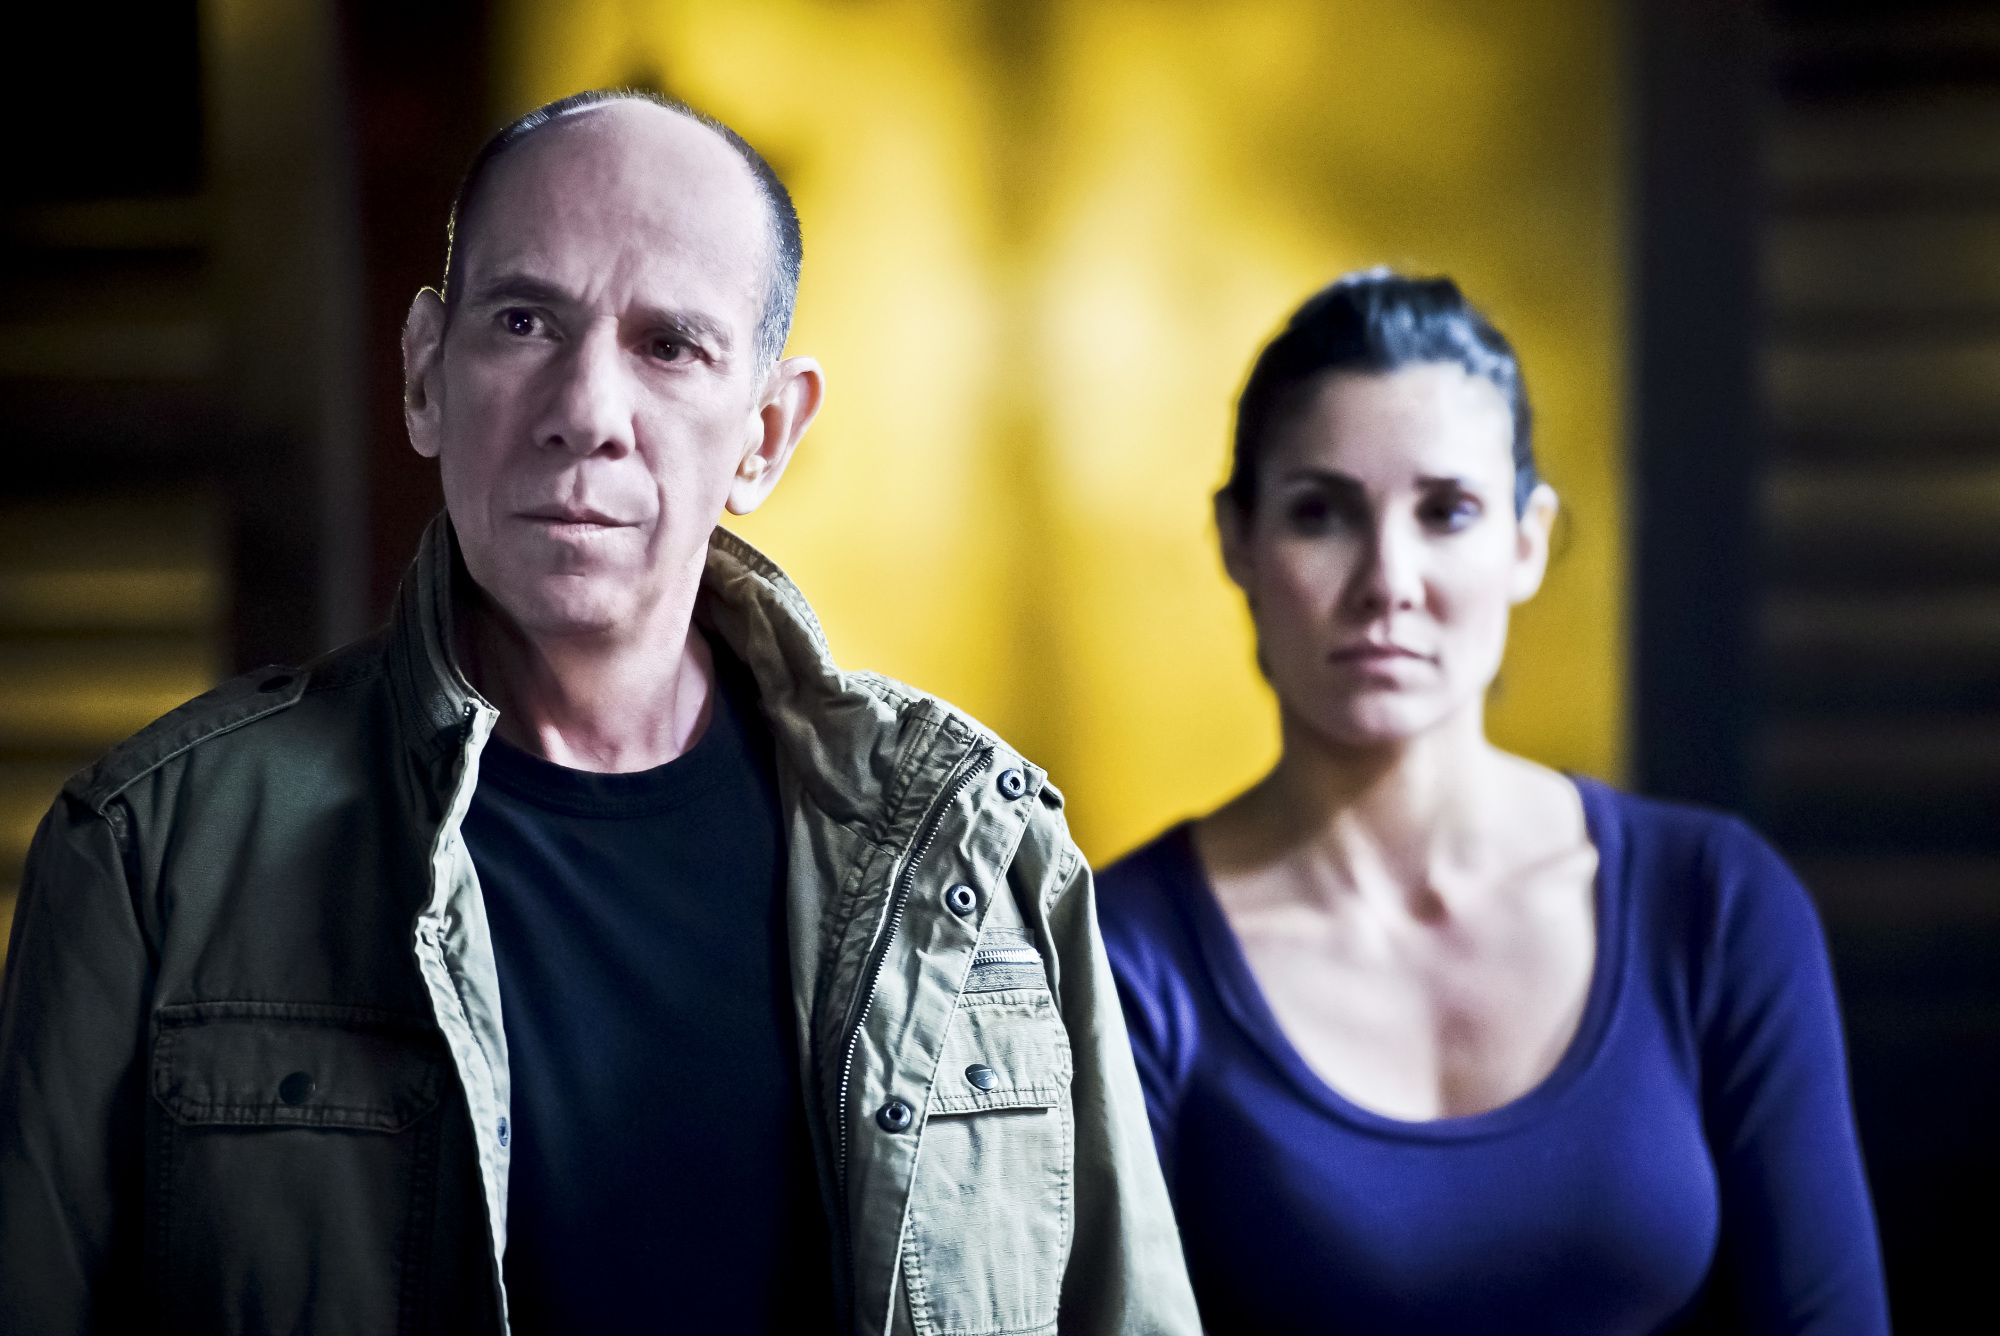 Miguel Ferrer as NCIS Assistant Director Owen Granger and Daniela Ruah as Special Agent Kensi Blye